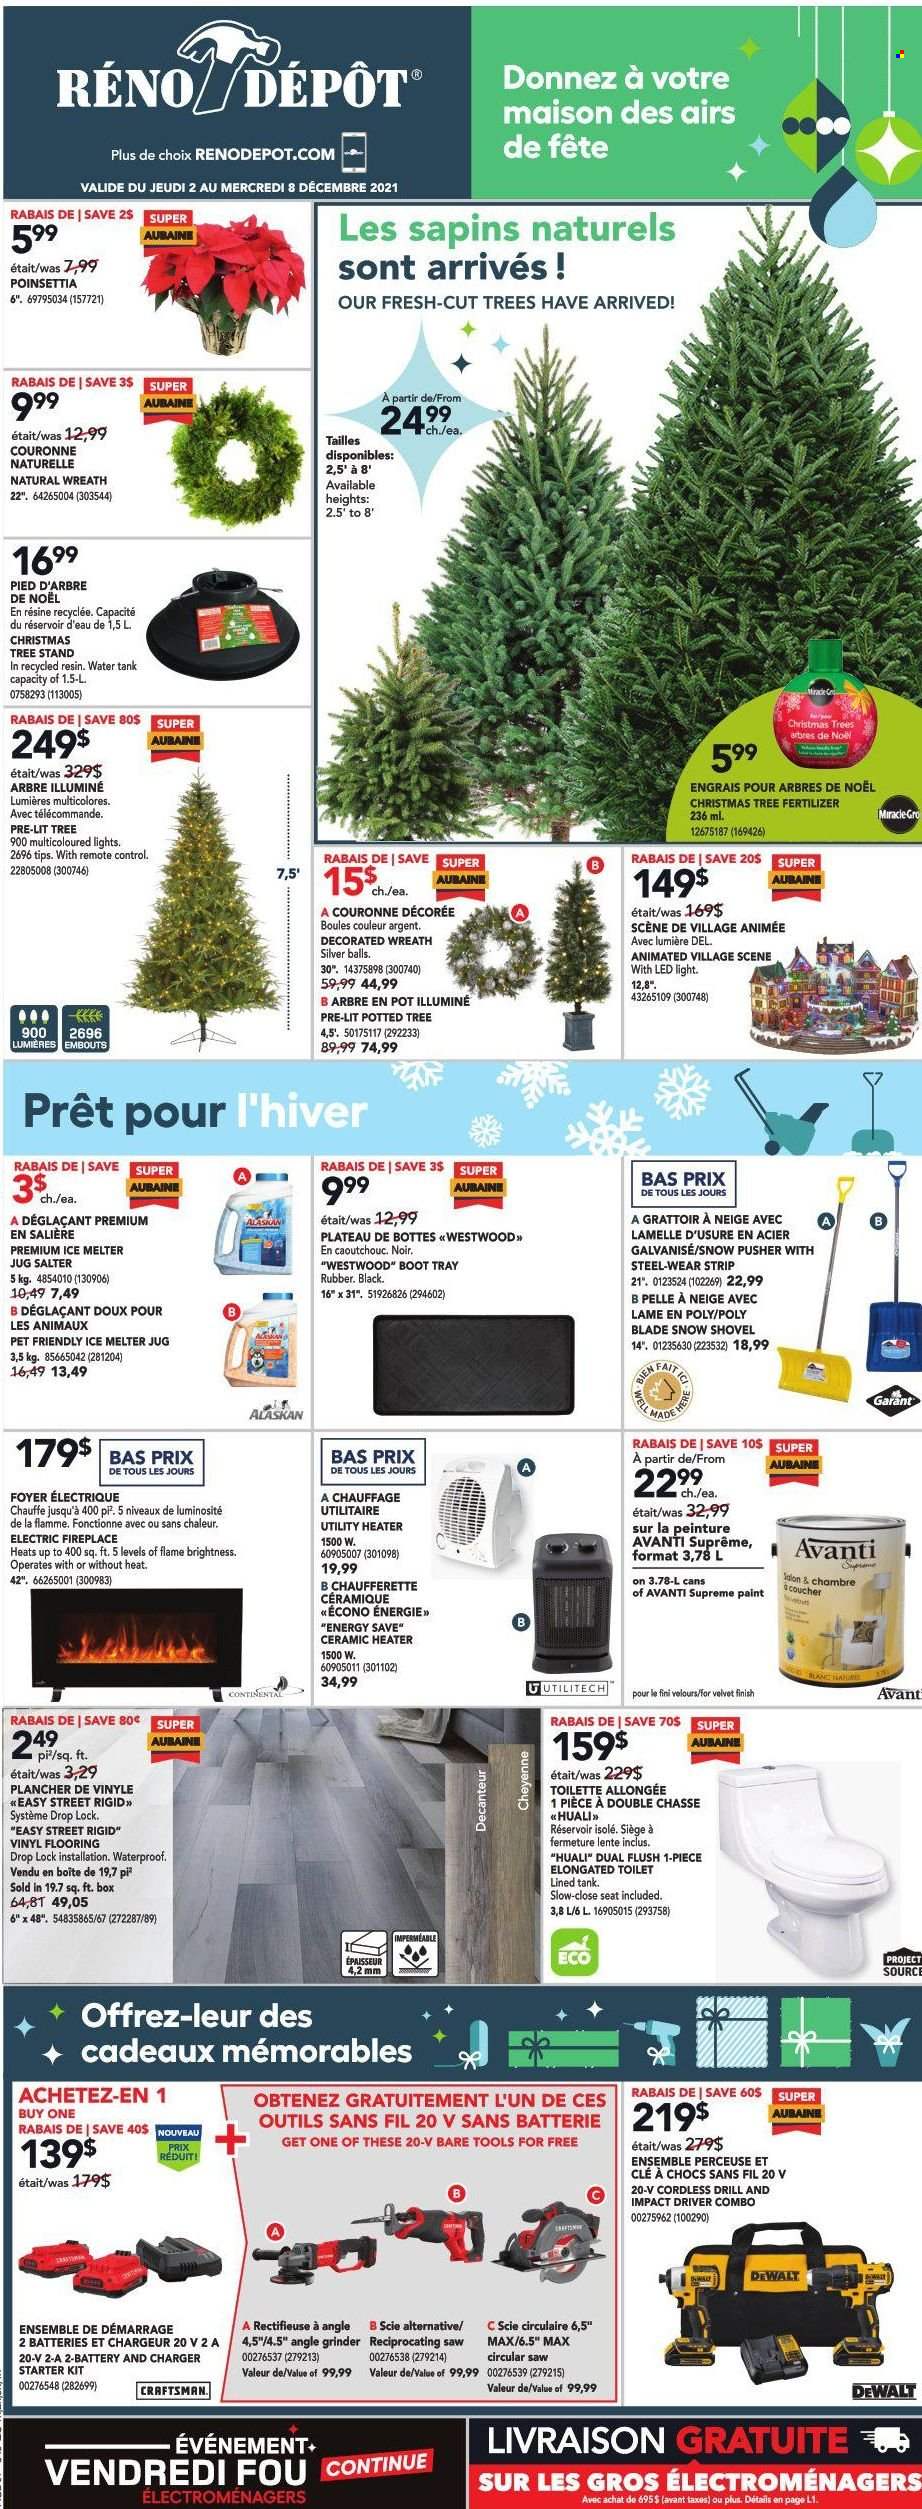 thumbnail - Réno-Dépôt Flyer - December 02, 2021 - December 08, 2021 - Sales products - remote control, grinder, wreath, christmas tree, christmas tree stand, toilet, water tank, paint, heater, fireplace, electric fireplace, tank, DeWALT, drill, impact driver, Craftsman, circular saw, saw, angle grinder, reciprocating saw, shovel, snow shovel, pot, poinsettia, fertilizer. Page 1.